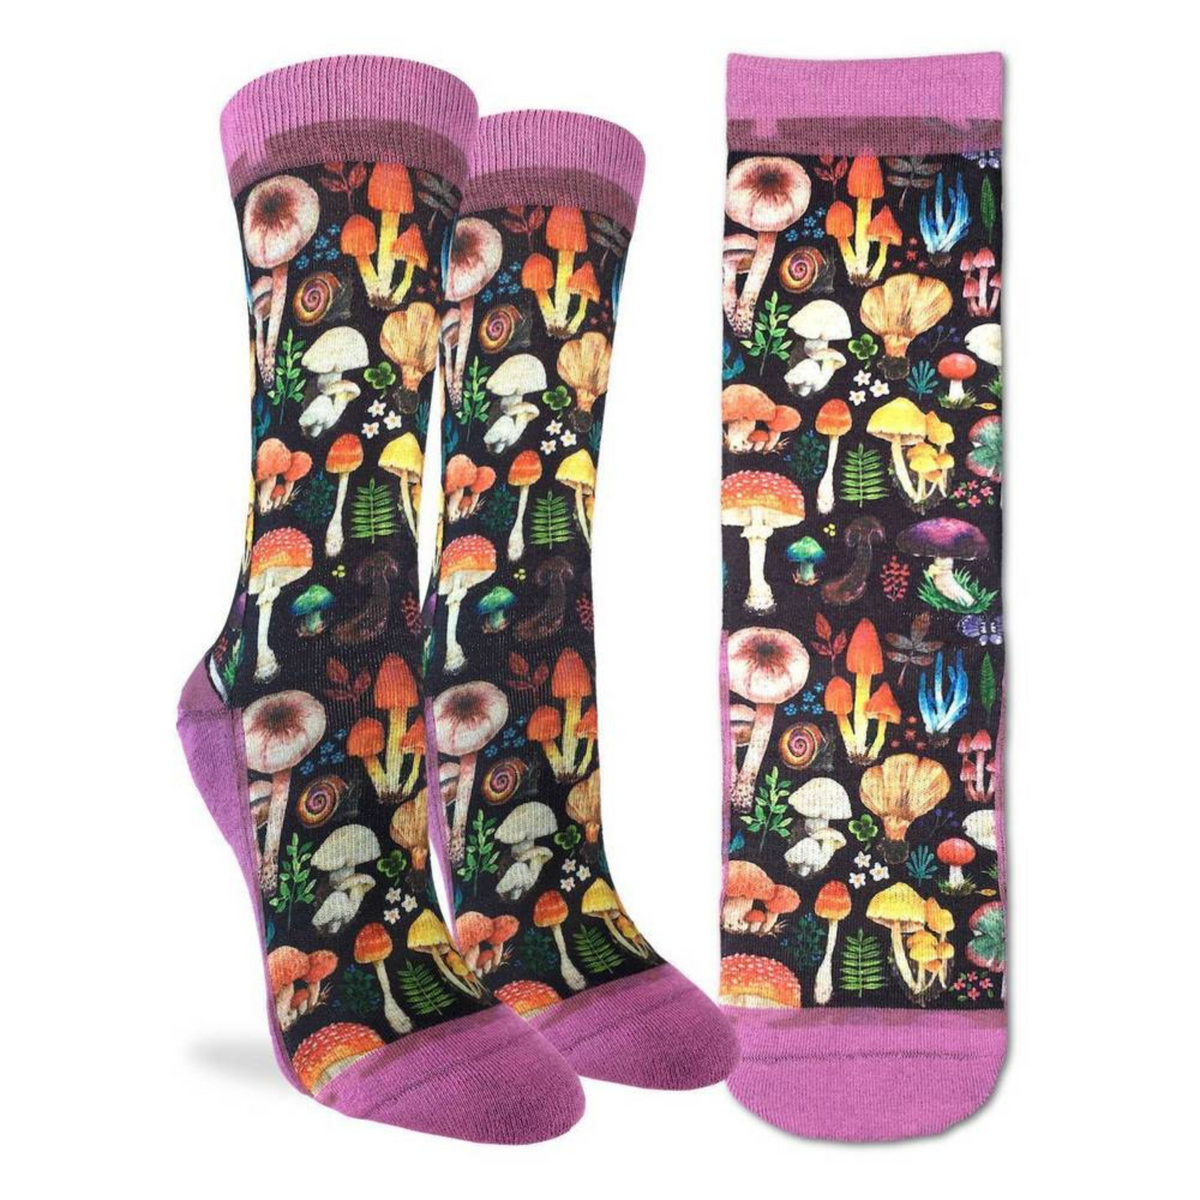 Good Luck Sock Mushroom women&#39;s socks featuring different types of mushrooms on black background on display with pink cuff, heel and toe